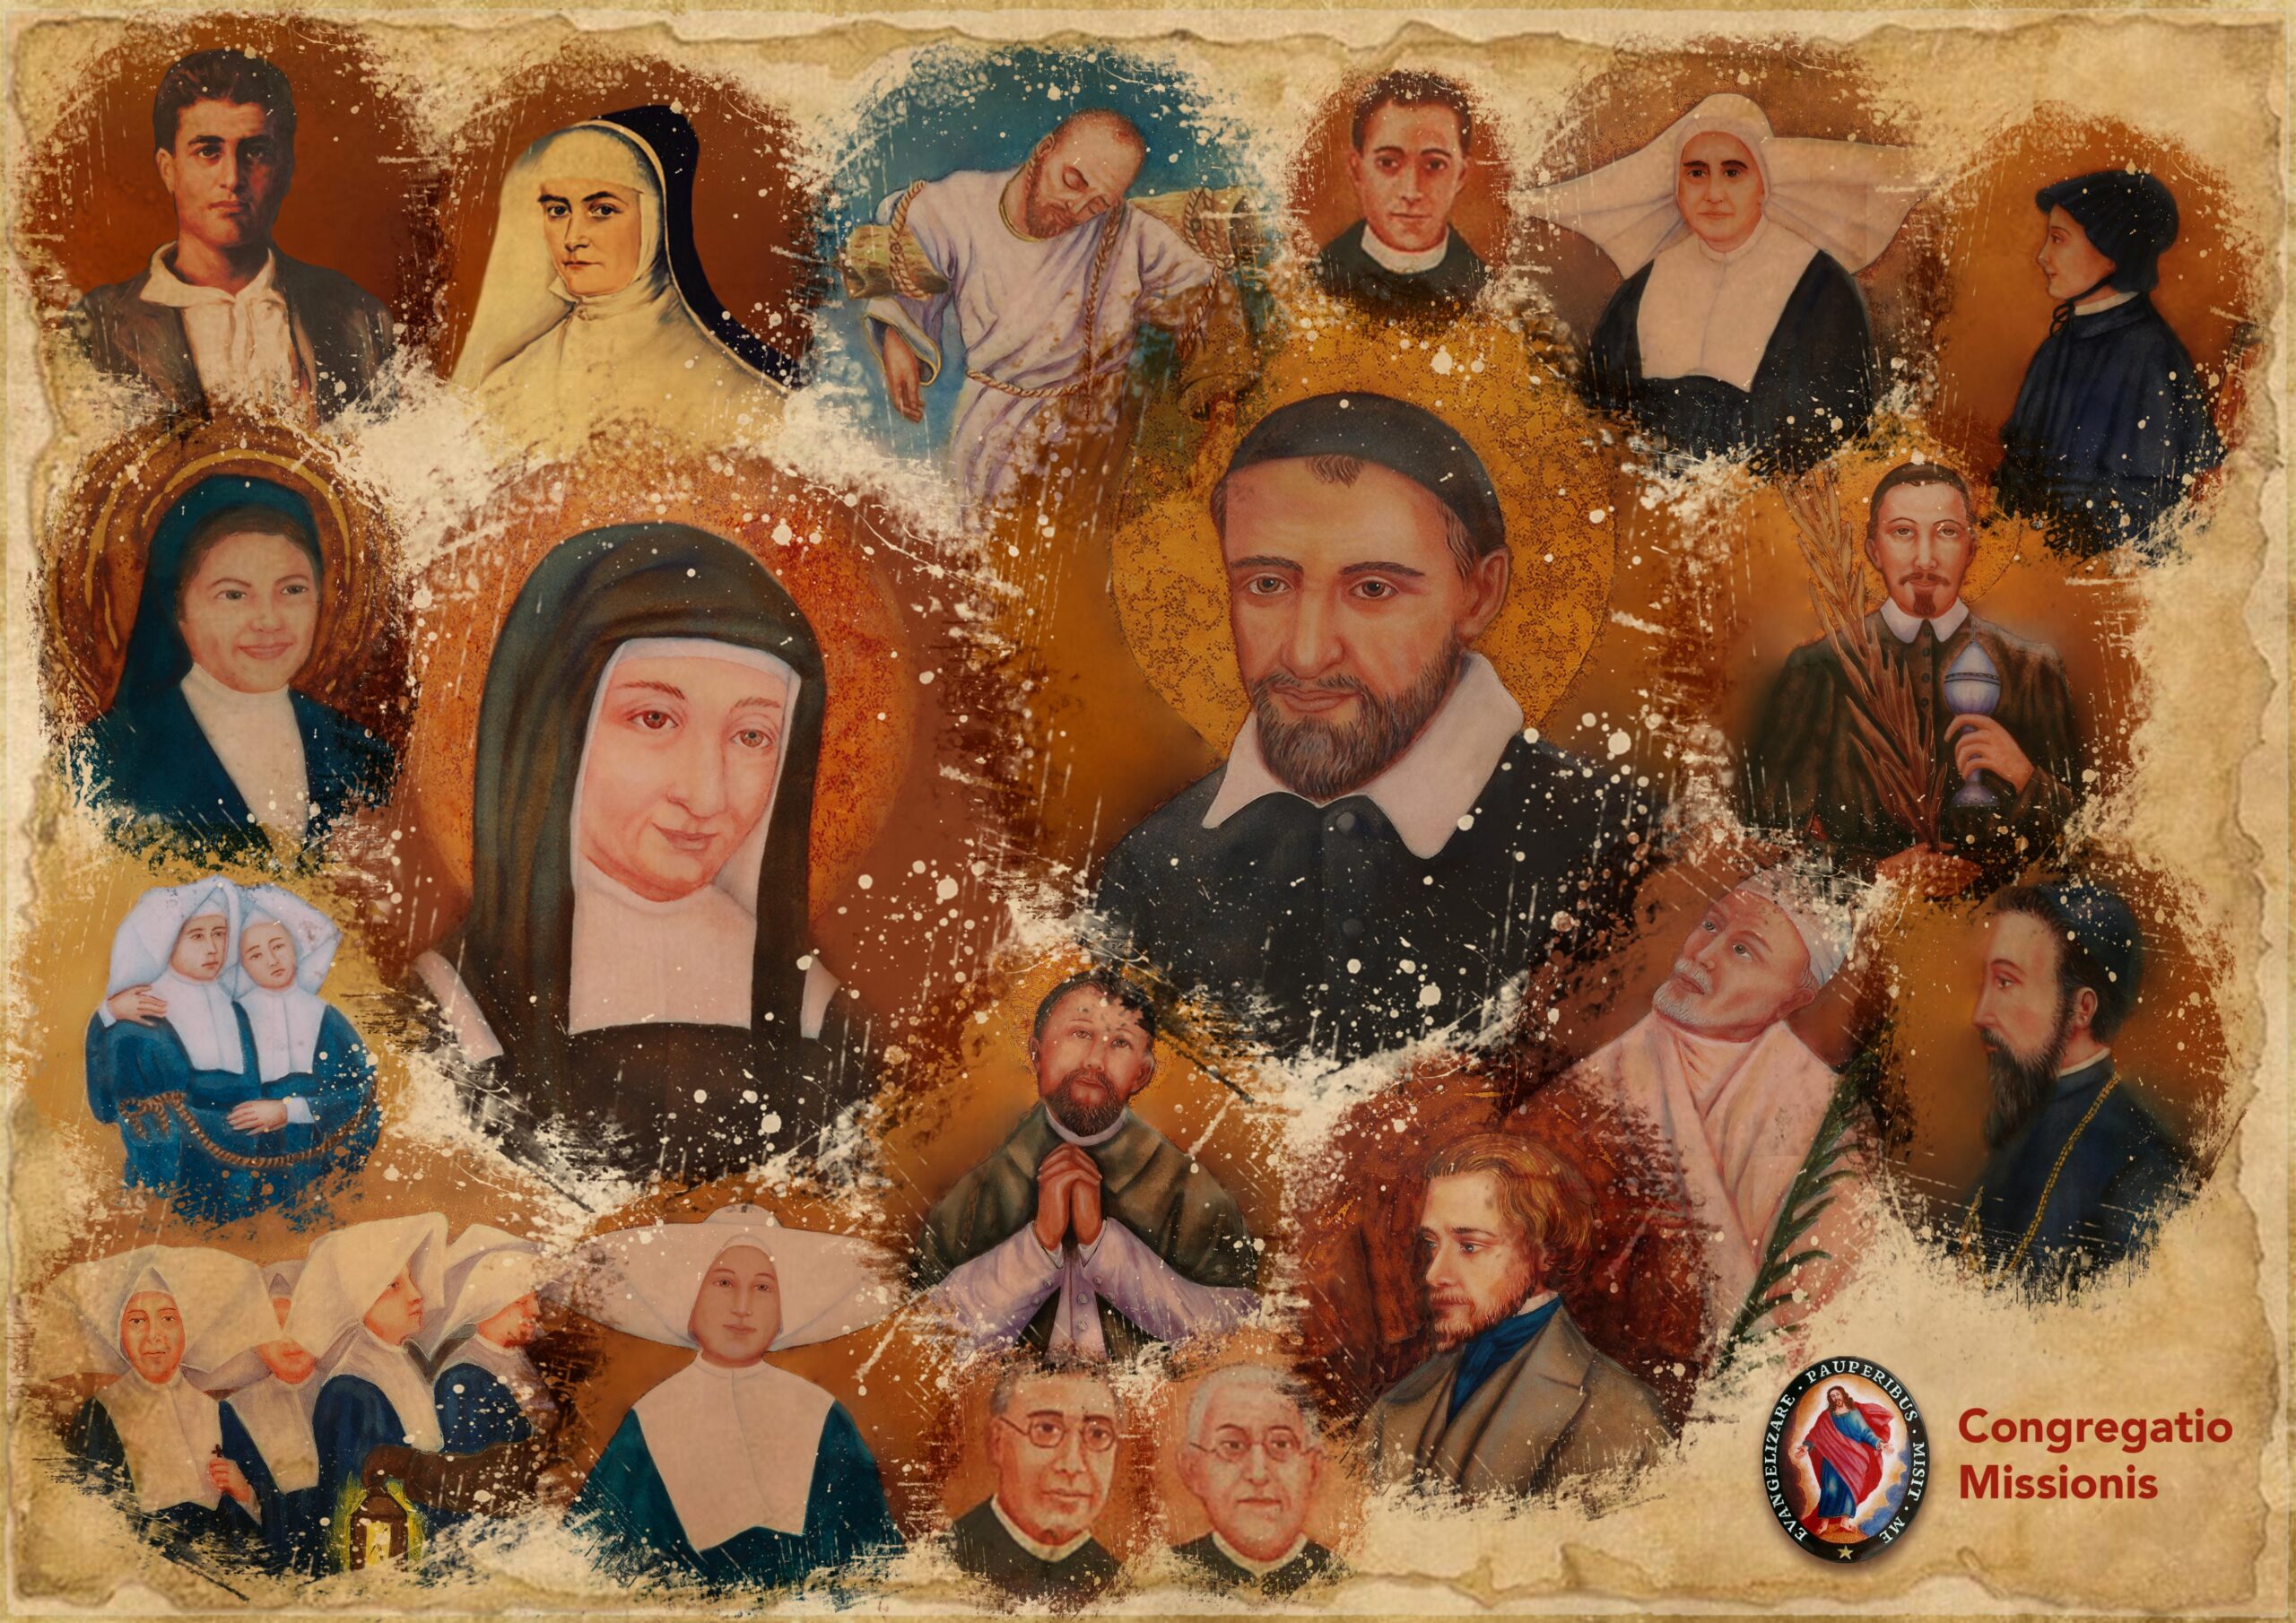 PRESS RELEASE - The Vincentian Family celebrates the Feast of Our